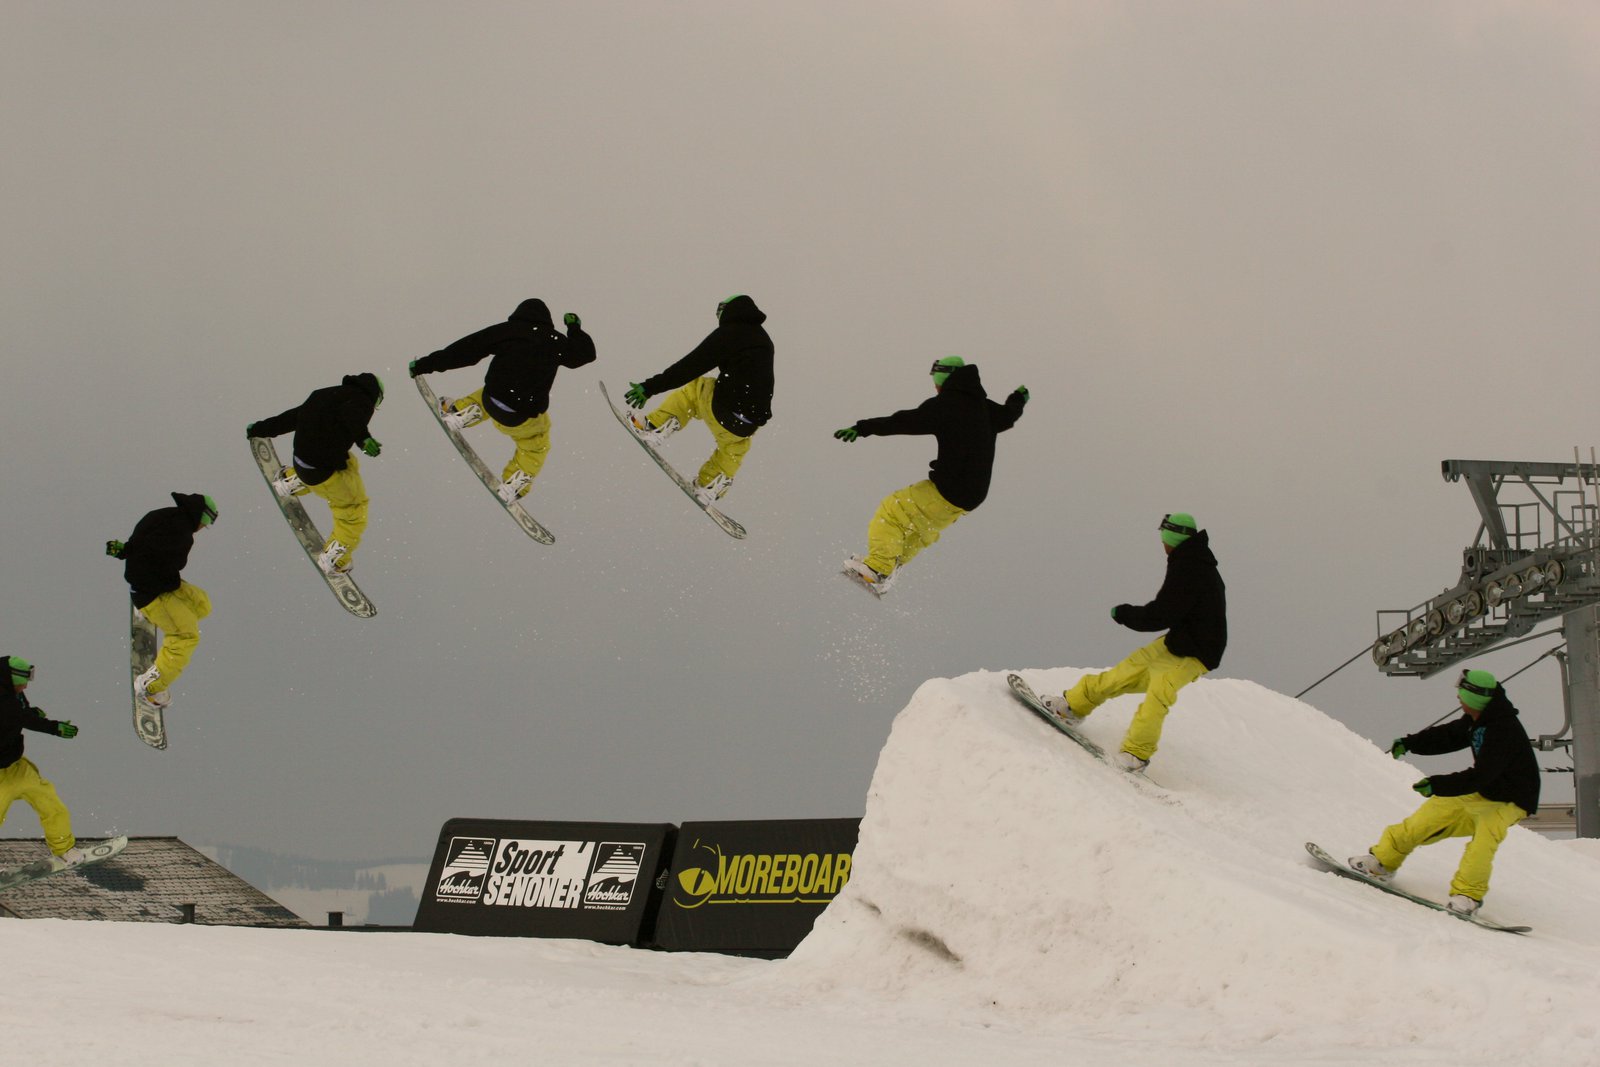 Snowboard cab3 sequence